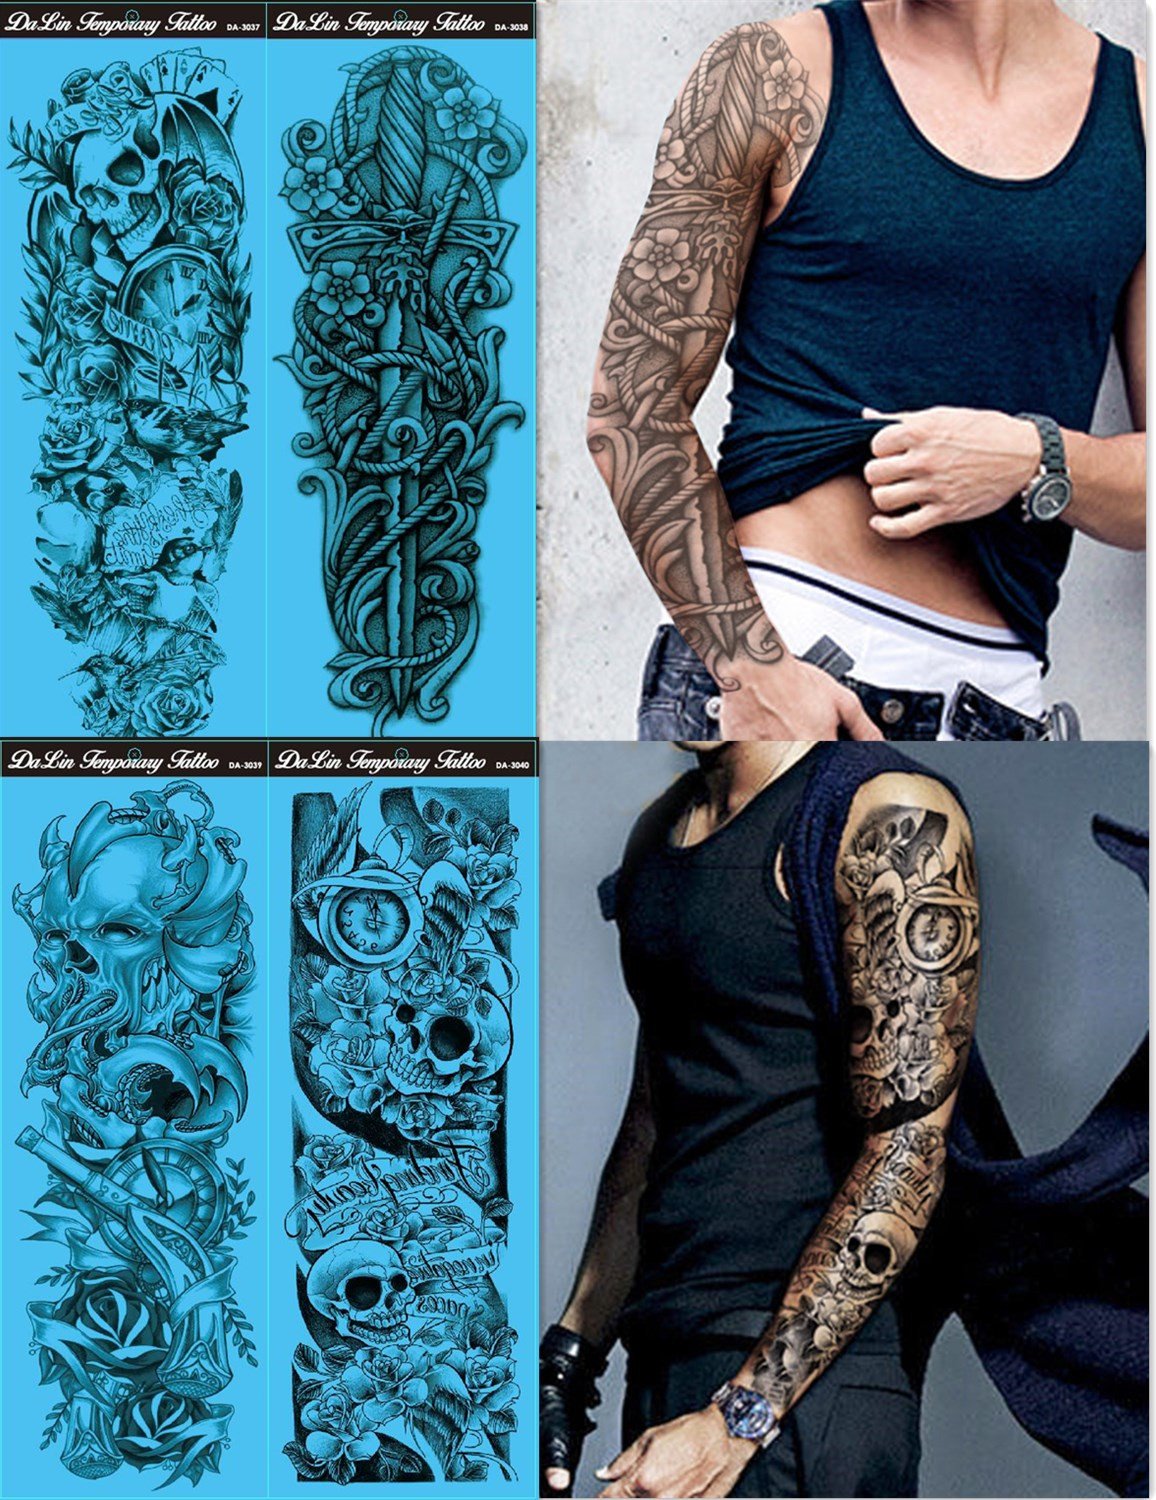 Amazon.com : DaLin Extra Large Full Arm Temporary Tattoos and Half Arm  Tattoo Sleeves for Men Women, 14 Sheets (Collection 13) : Beauty & Personal  Care